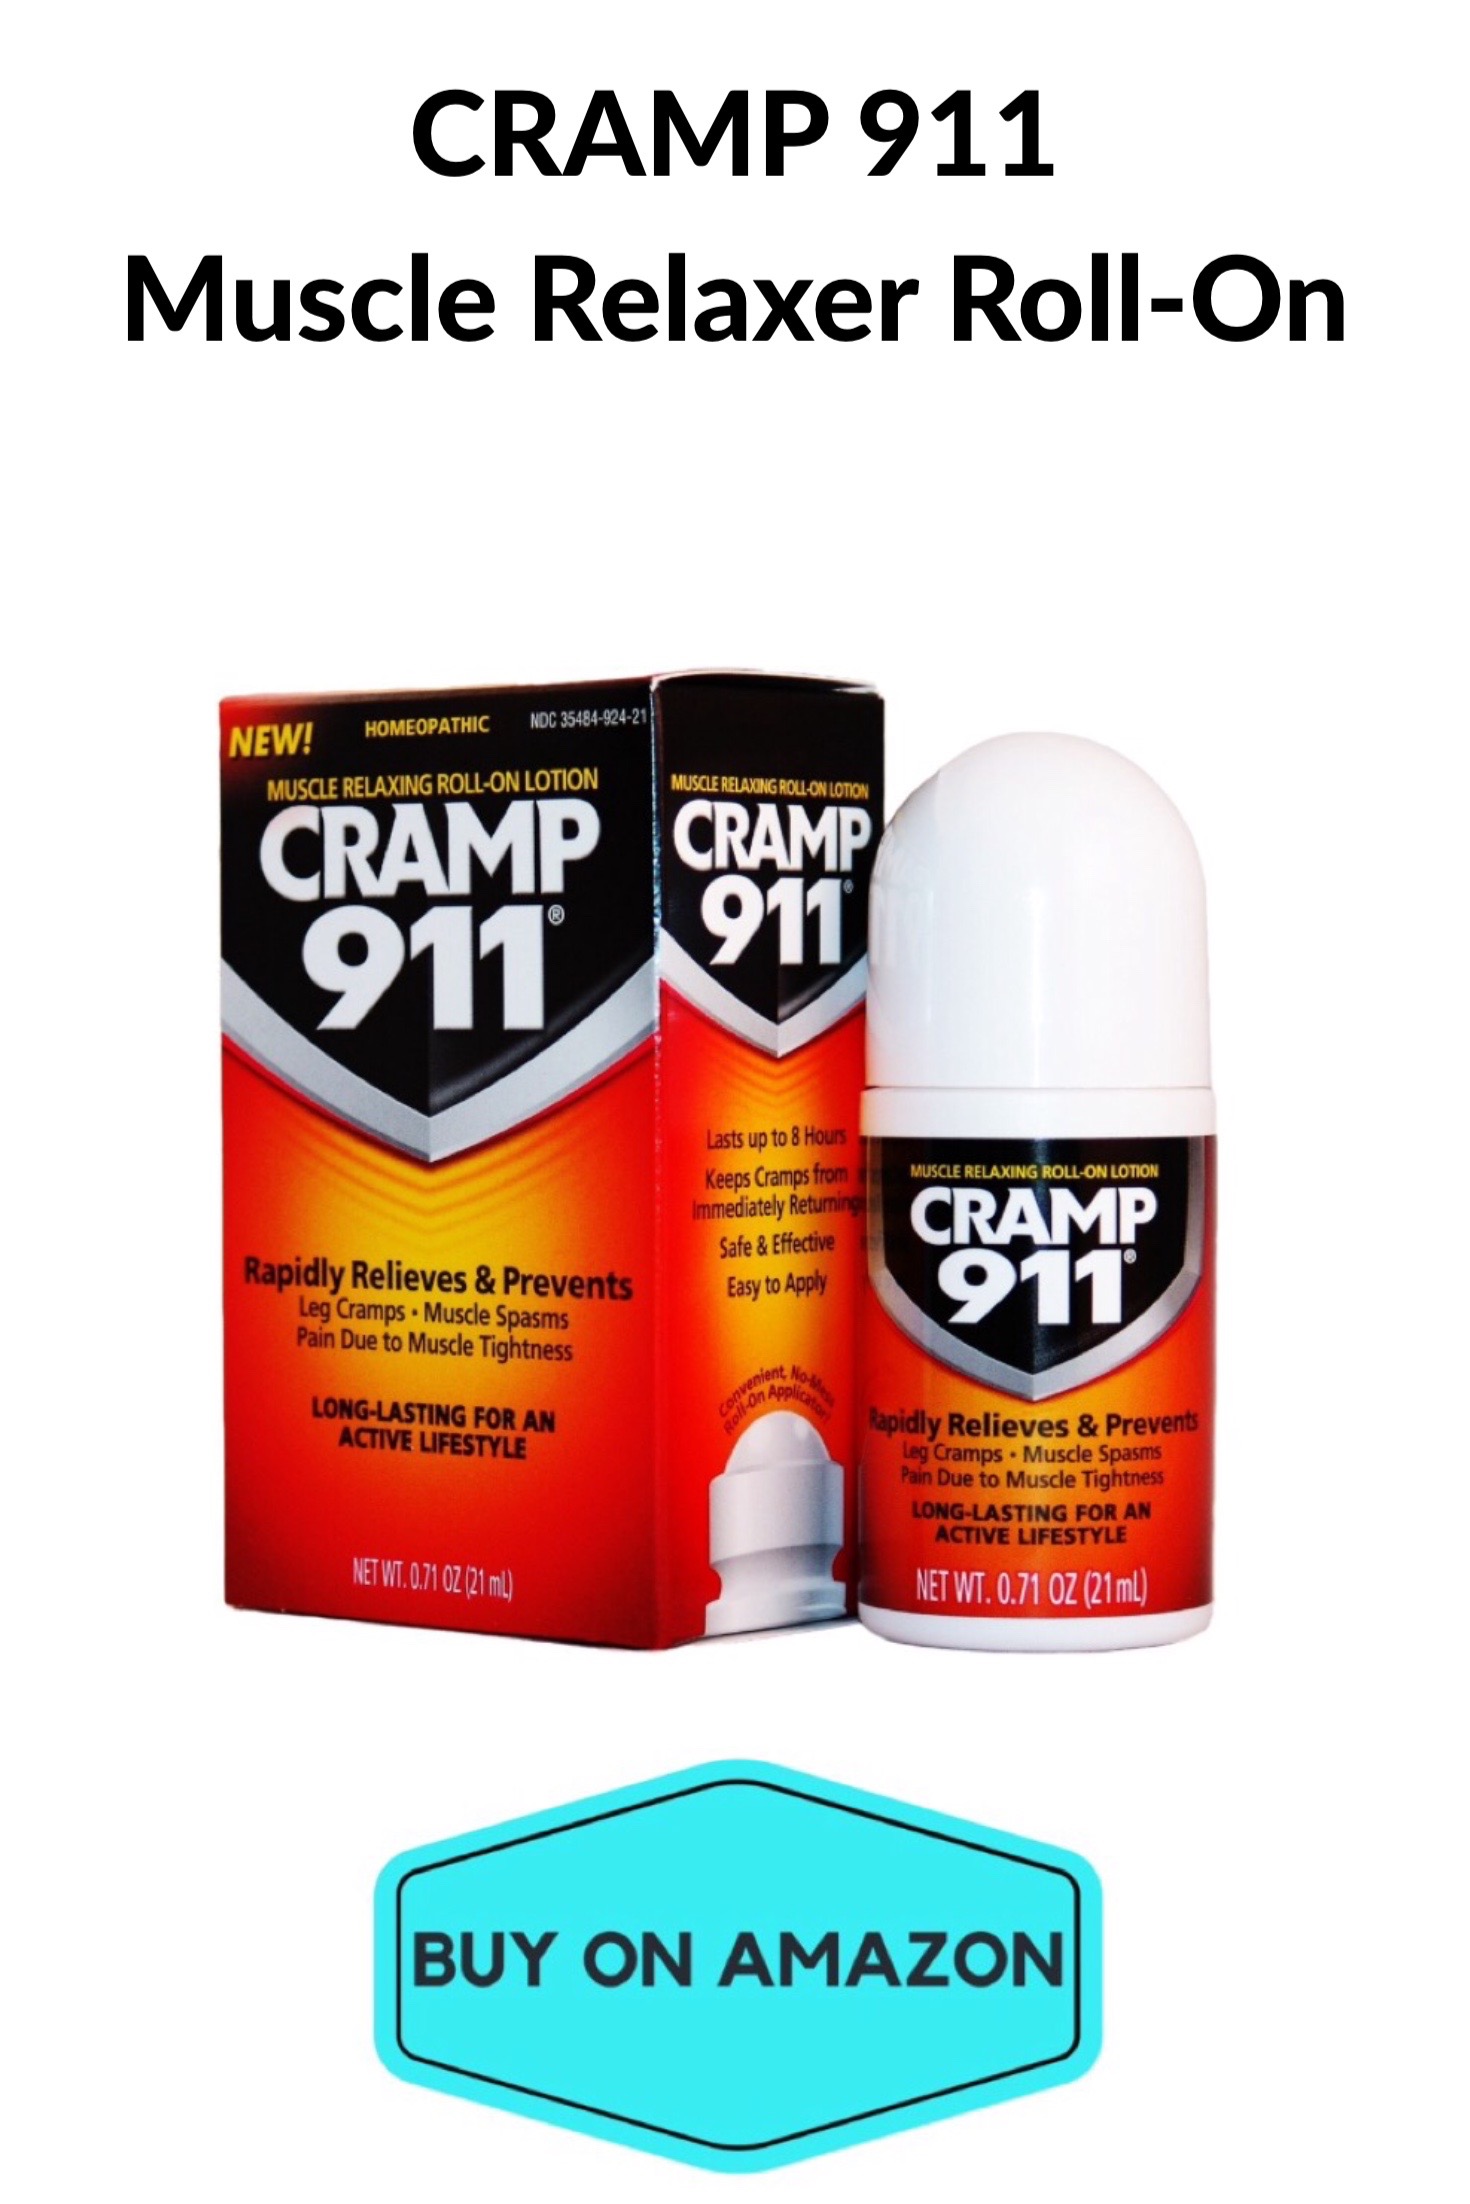 CRAMP 911 Muscle Relaxer Roll-On